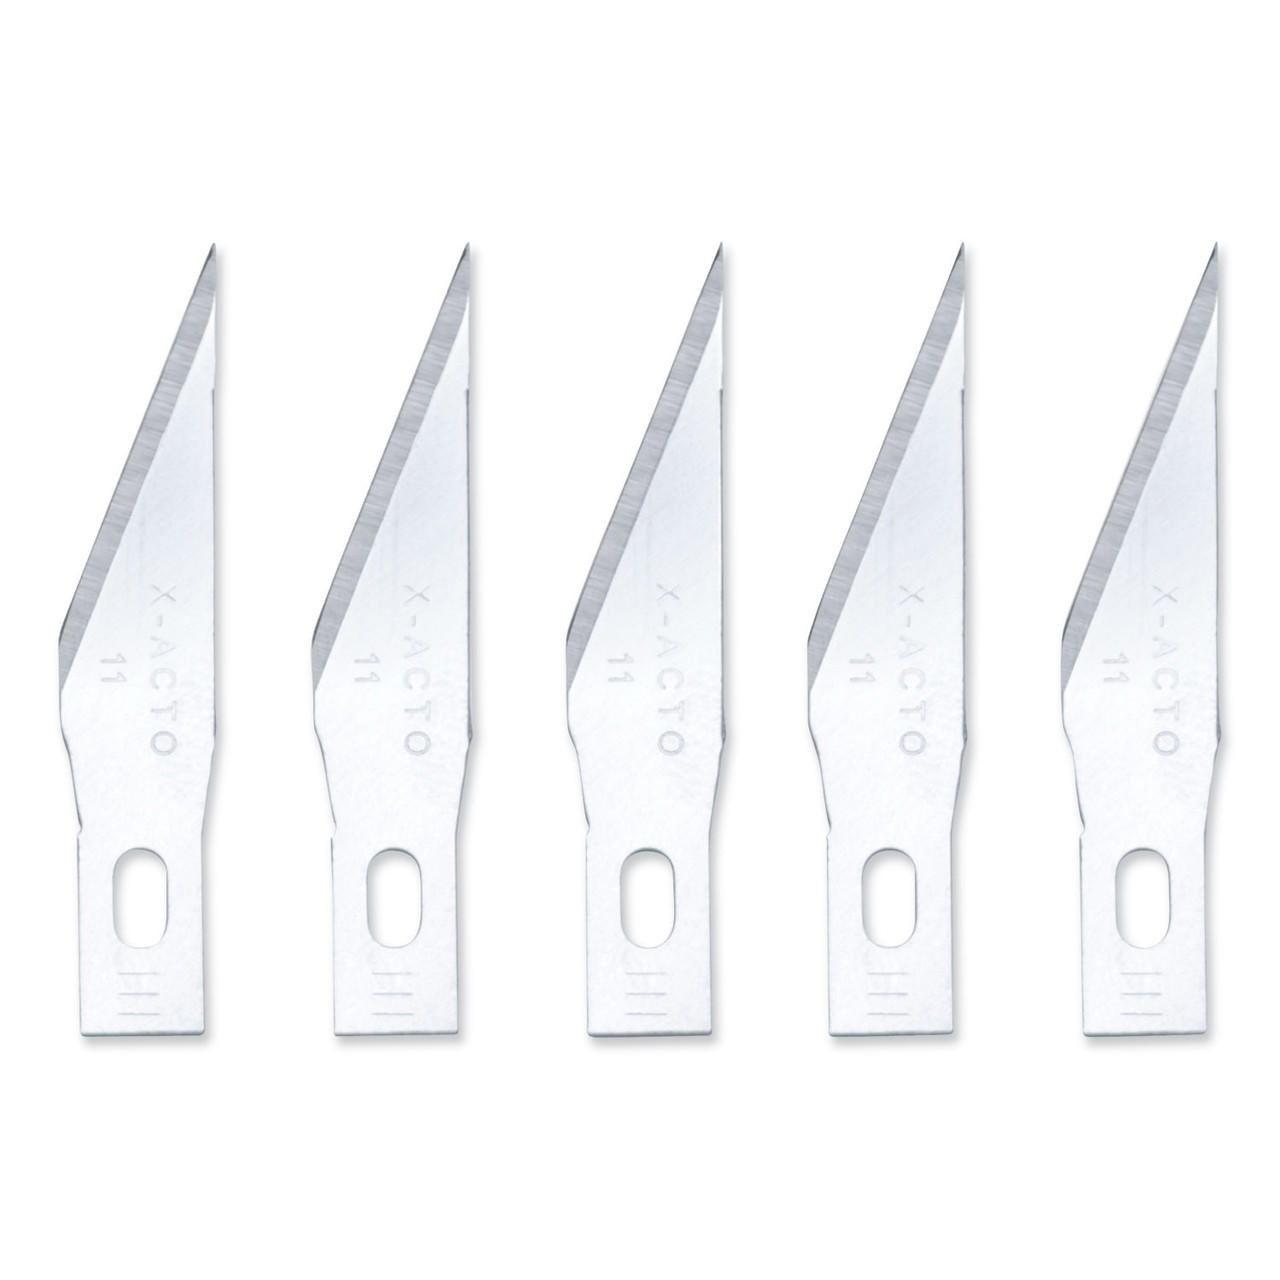 X-Acto Replacement Blades For Knife W/Safety Cap 5Pk (#11)